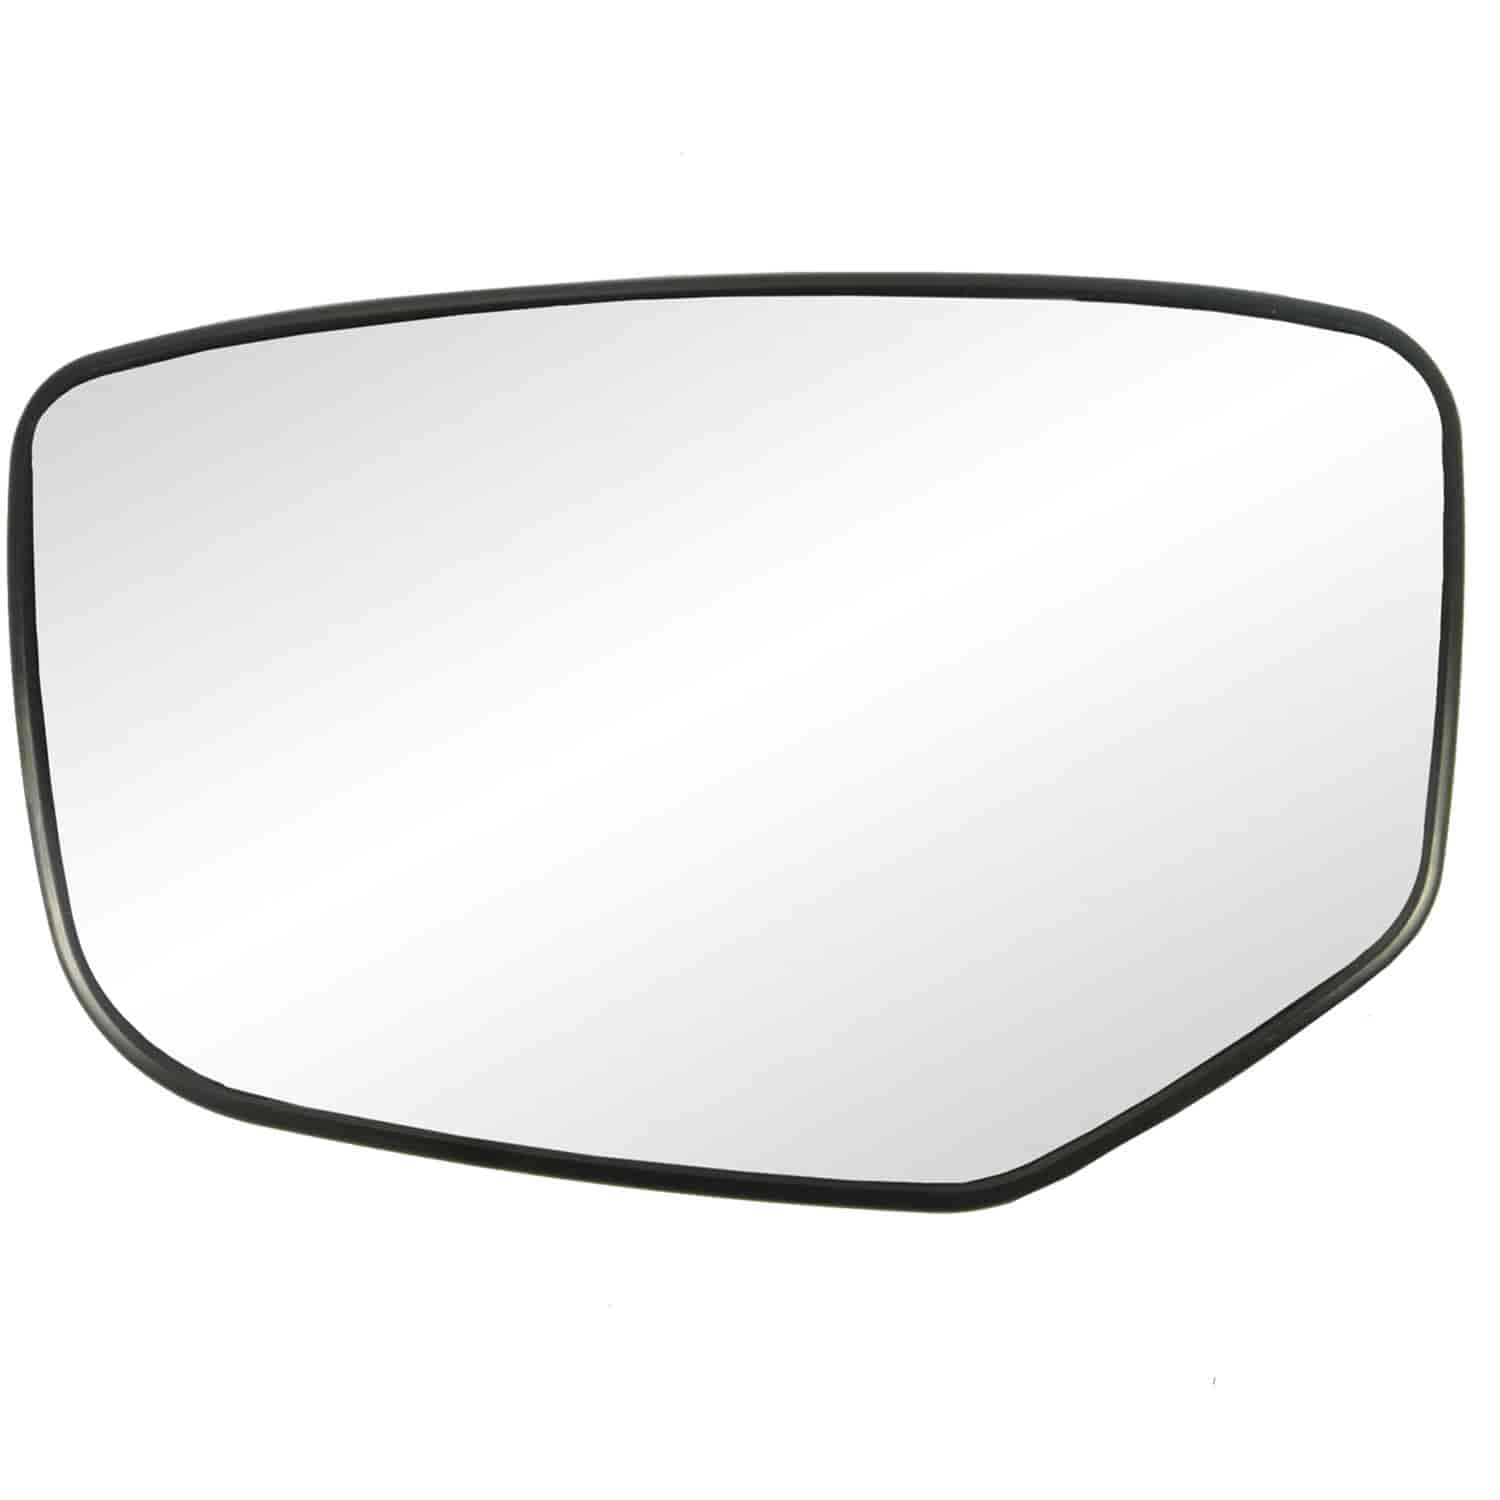 Heated Replacement Glass Assembly for 08-12 Accord replace your cracked or broken driver side mirror